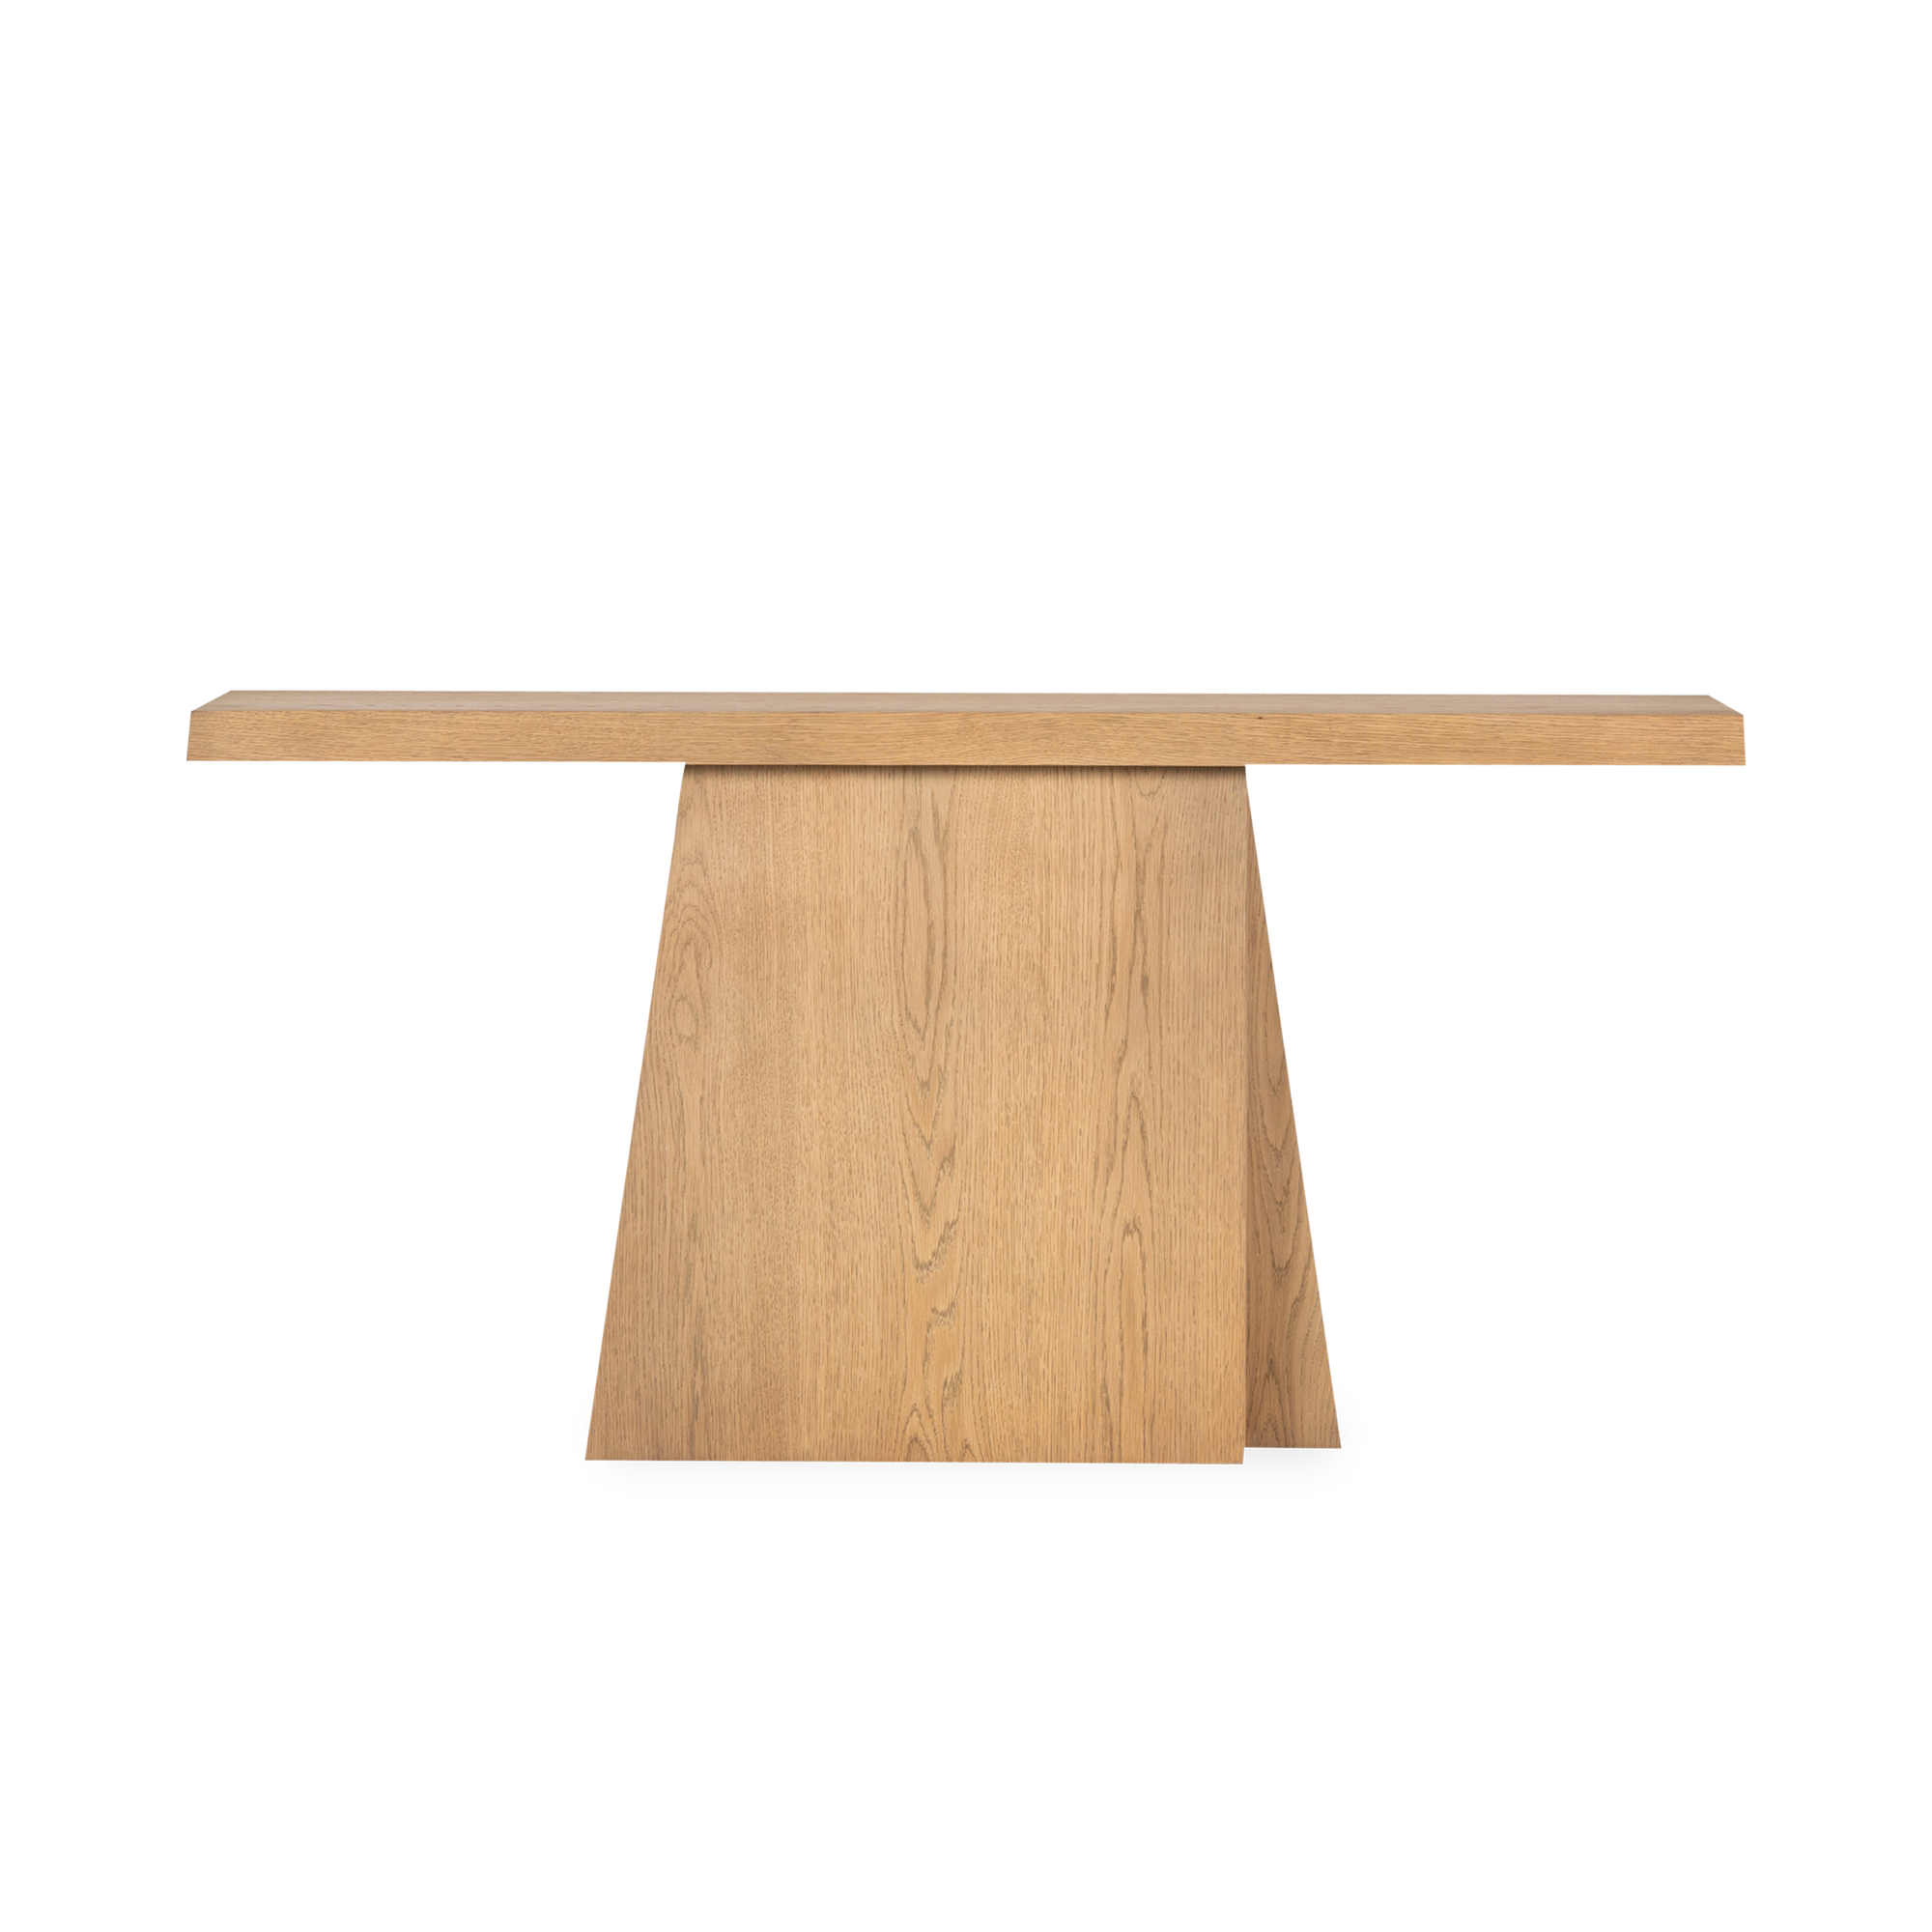 The Oblique Console Table draws inspiration from the raw power and geometric precision of 1960s Brutalist architecture.